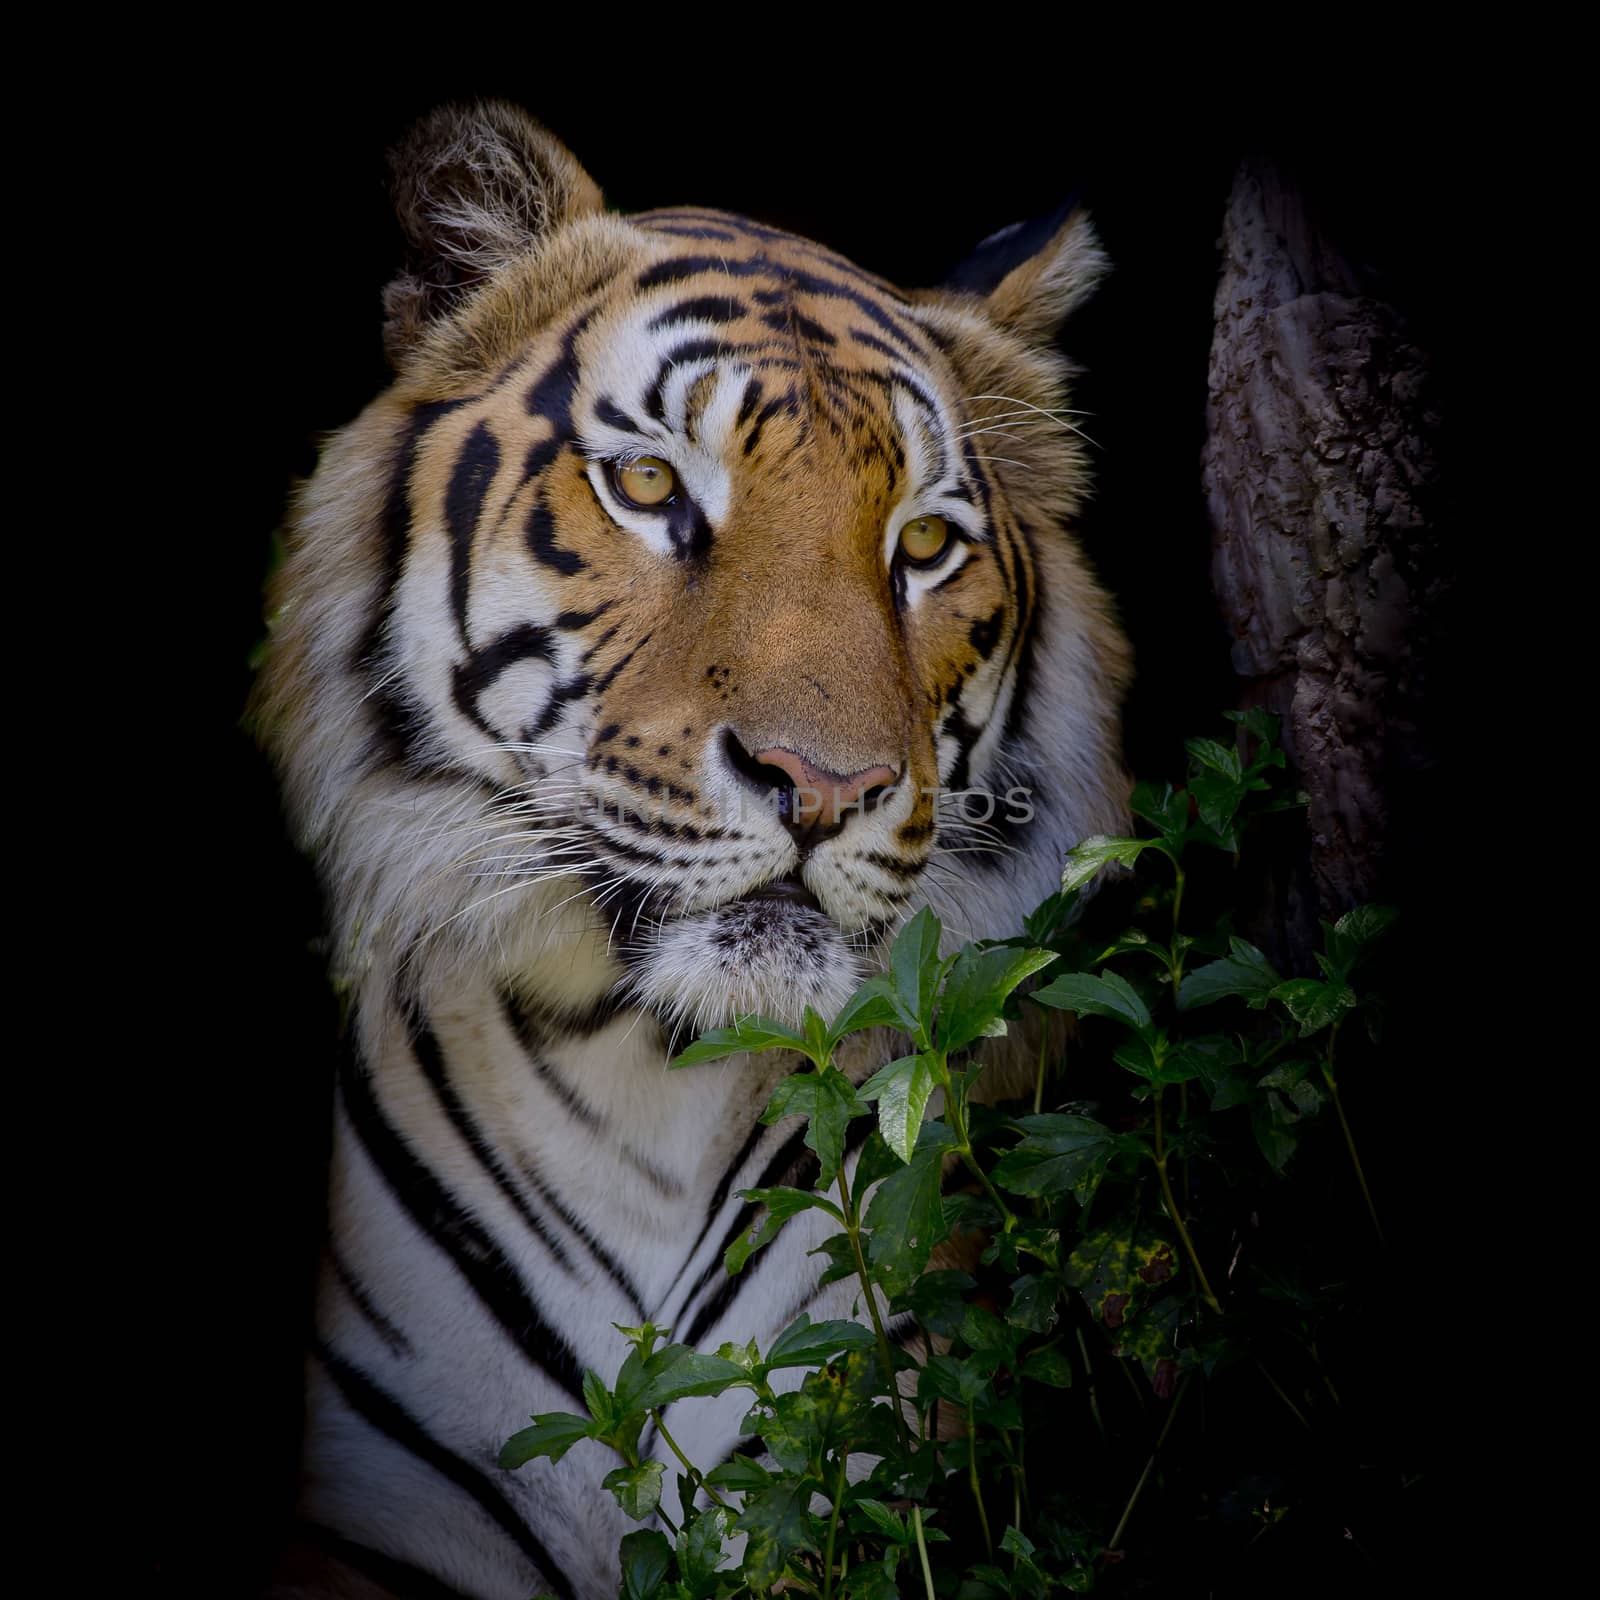 Tiger looking his prey and ready to catch it by art9858